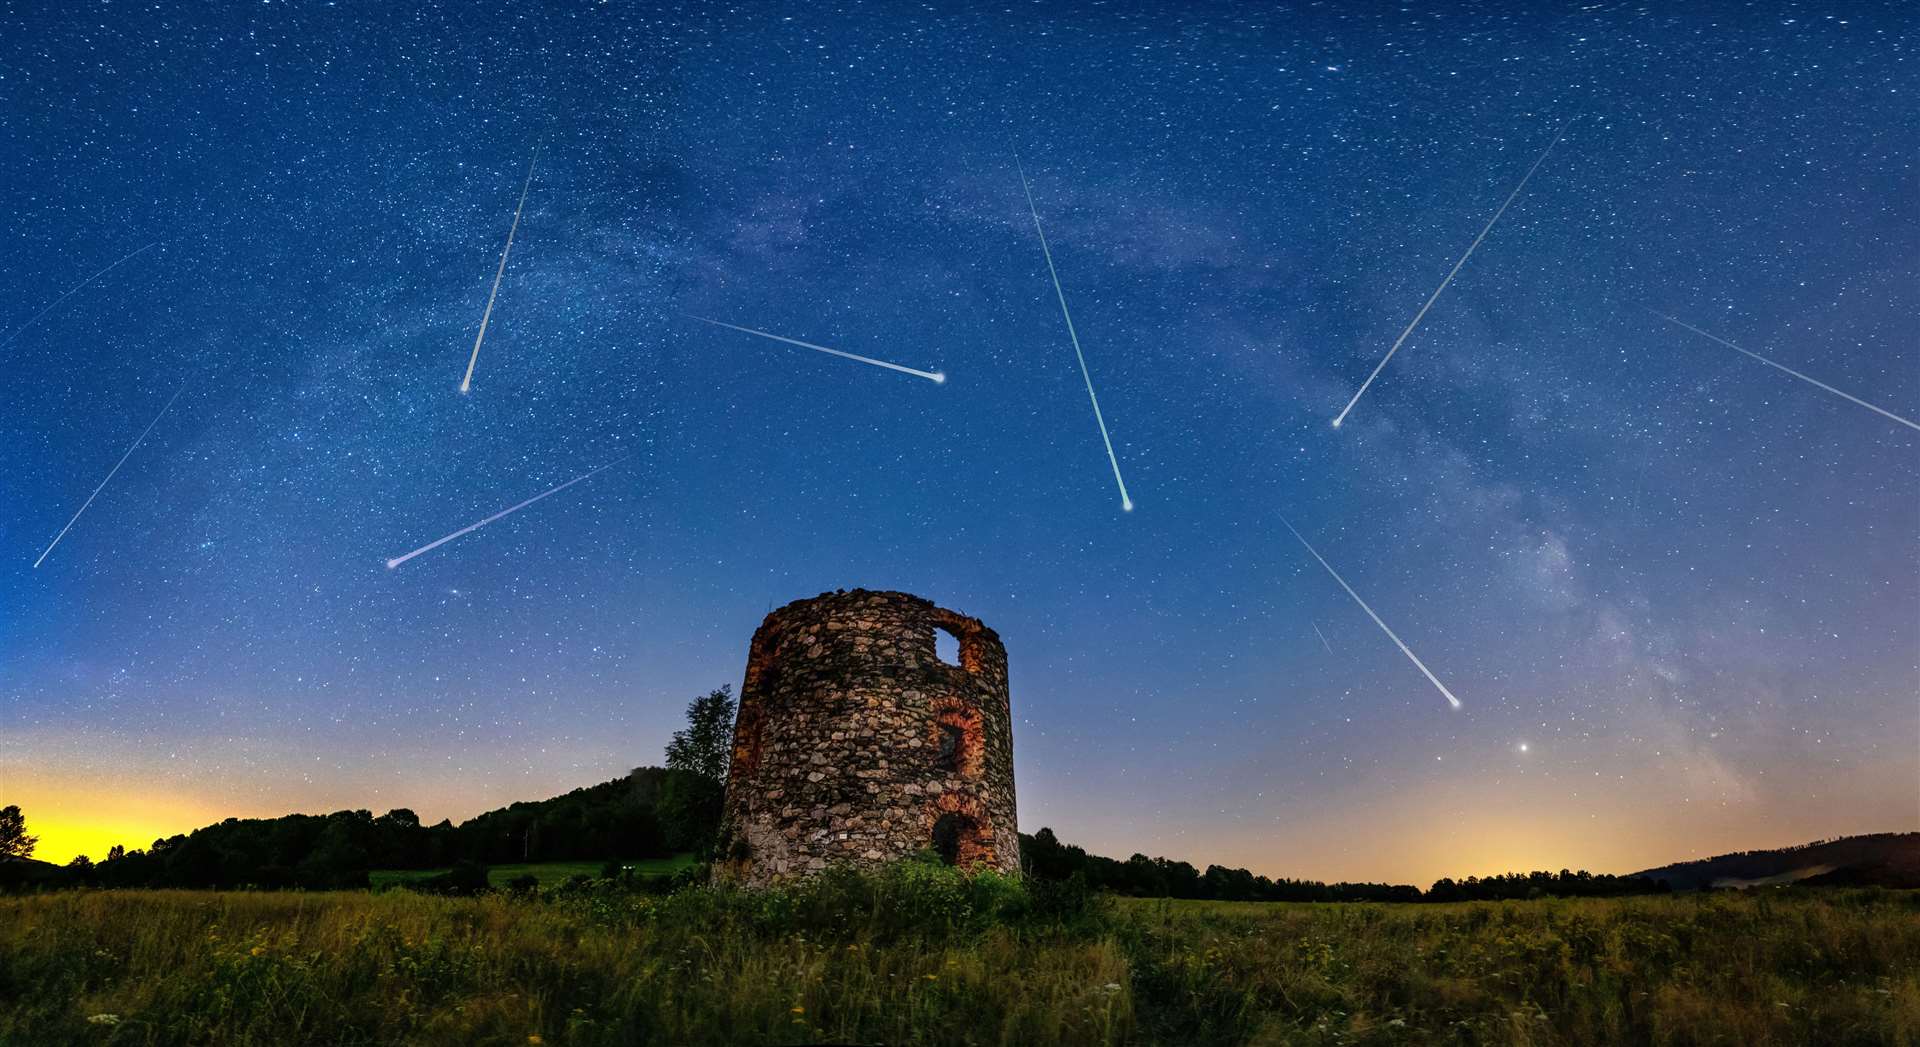 January's meteor shower is peaking over the UK on Tuesday night. Image: Stock photo.